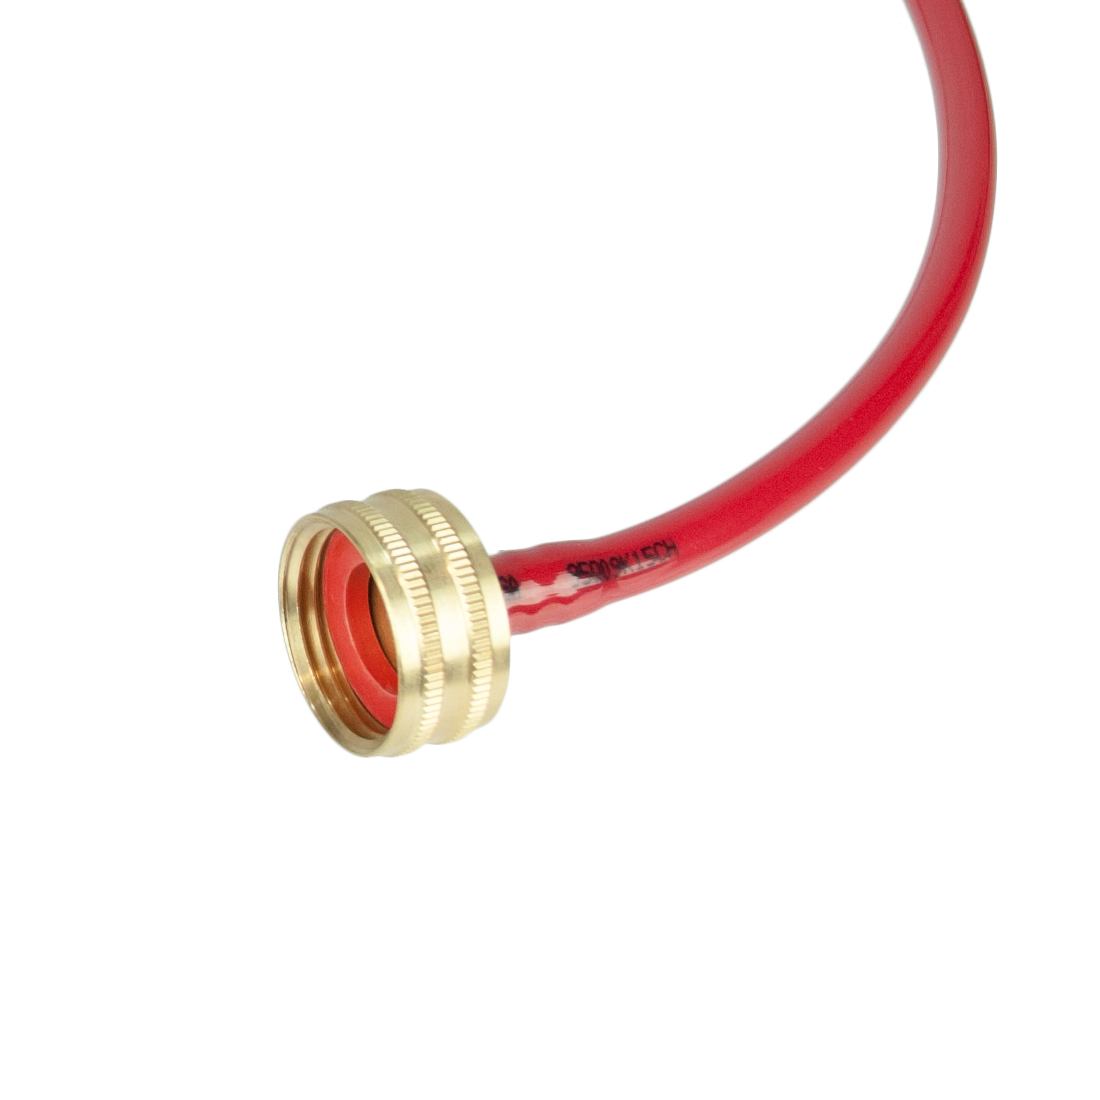 XERO Legacy Pure Red Waste Hose - Garden Hose Female Adapter Side View